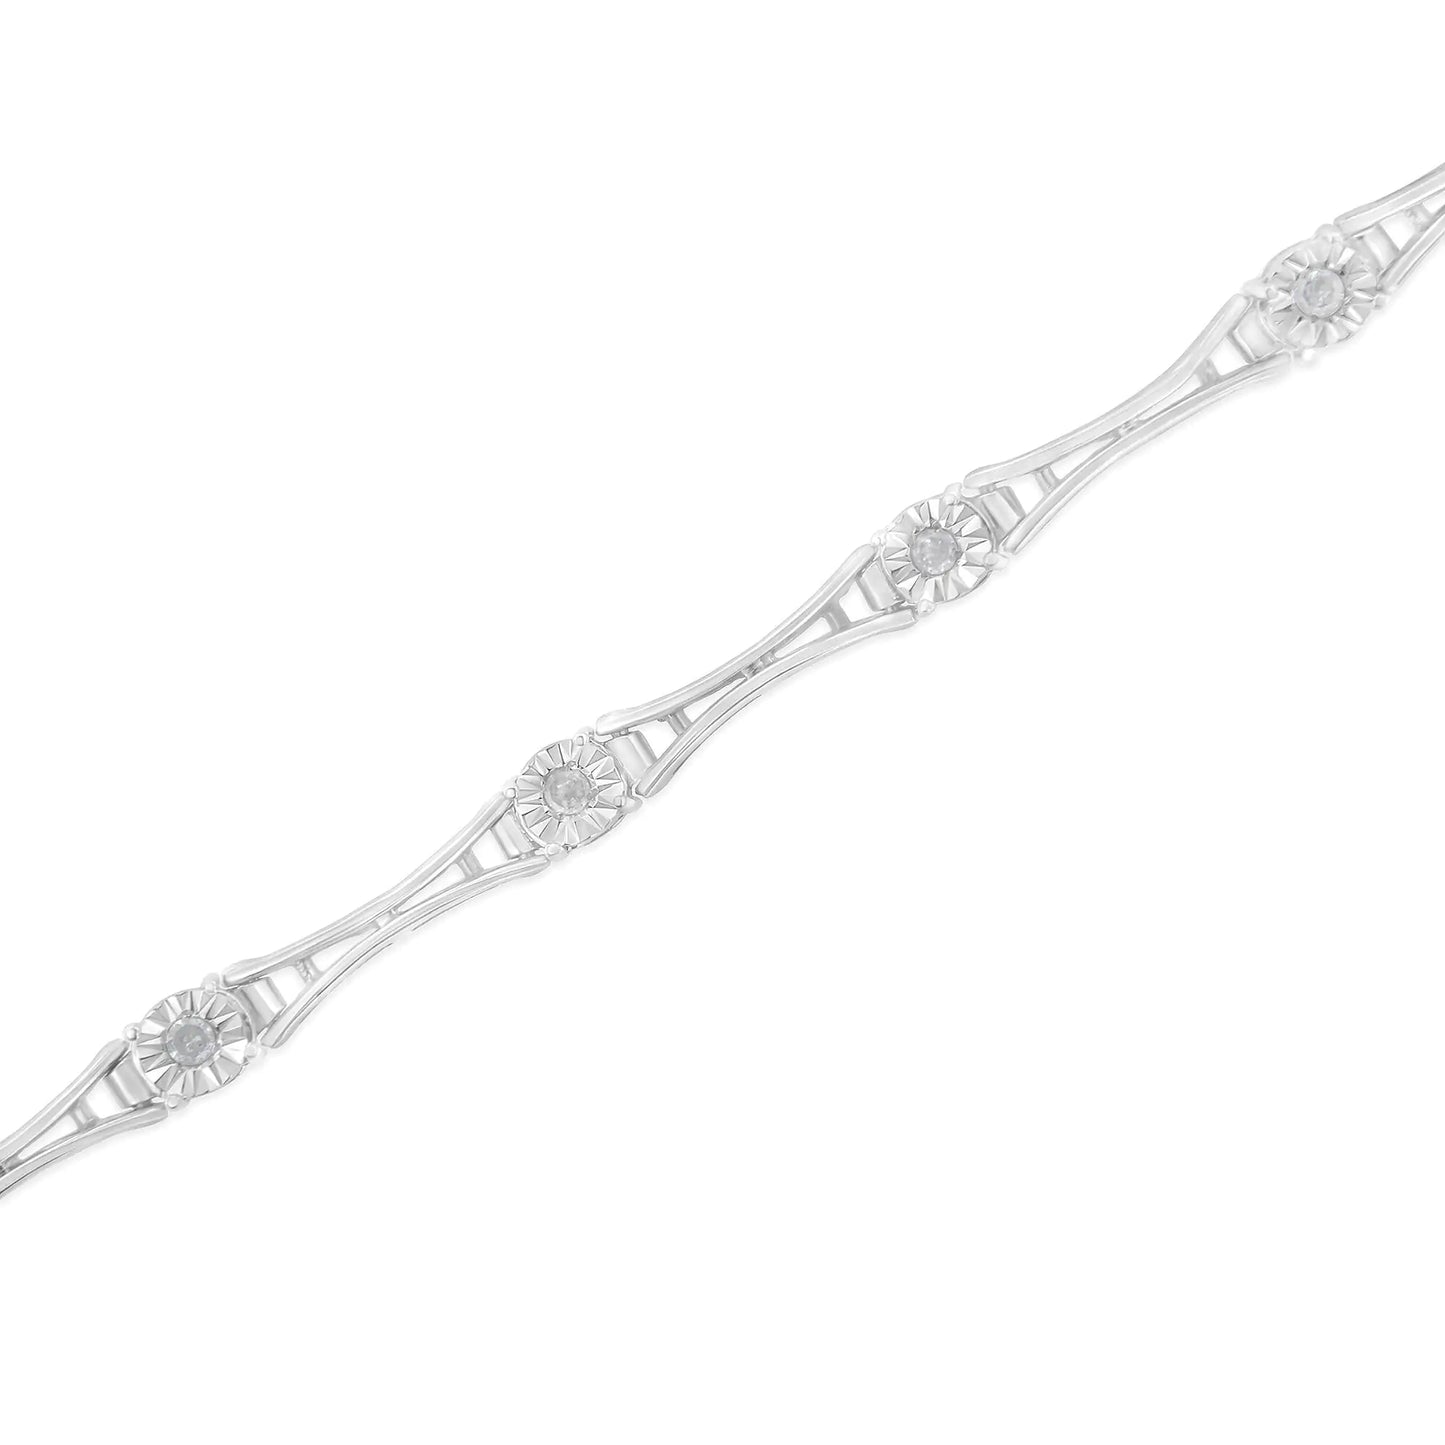 .925 Sterling Silver 1/4 Cttw Diamond Miracle-Set Flared-Bar 7" Link-Style Tennis Bracelet (I-J Color, I3 Clarity)